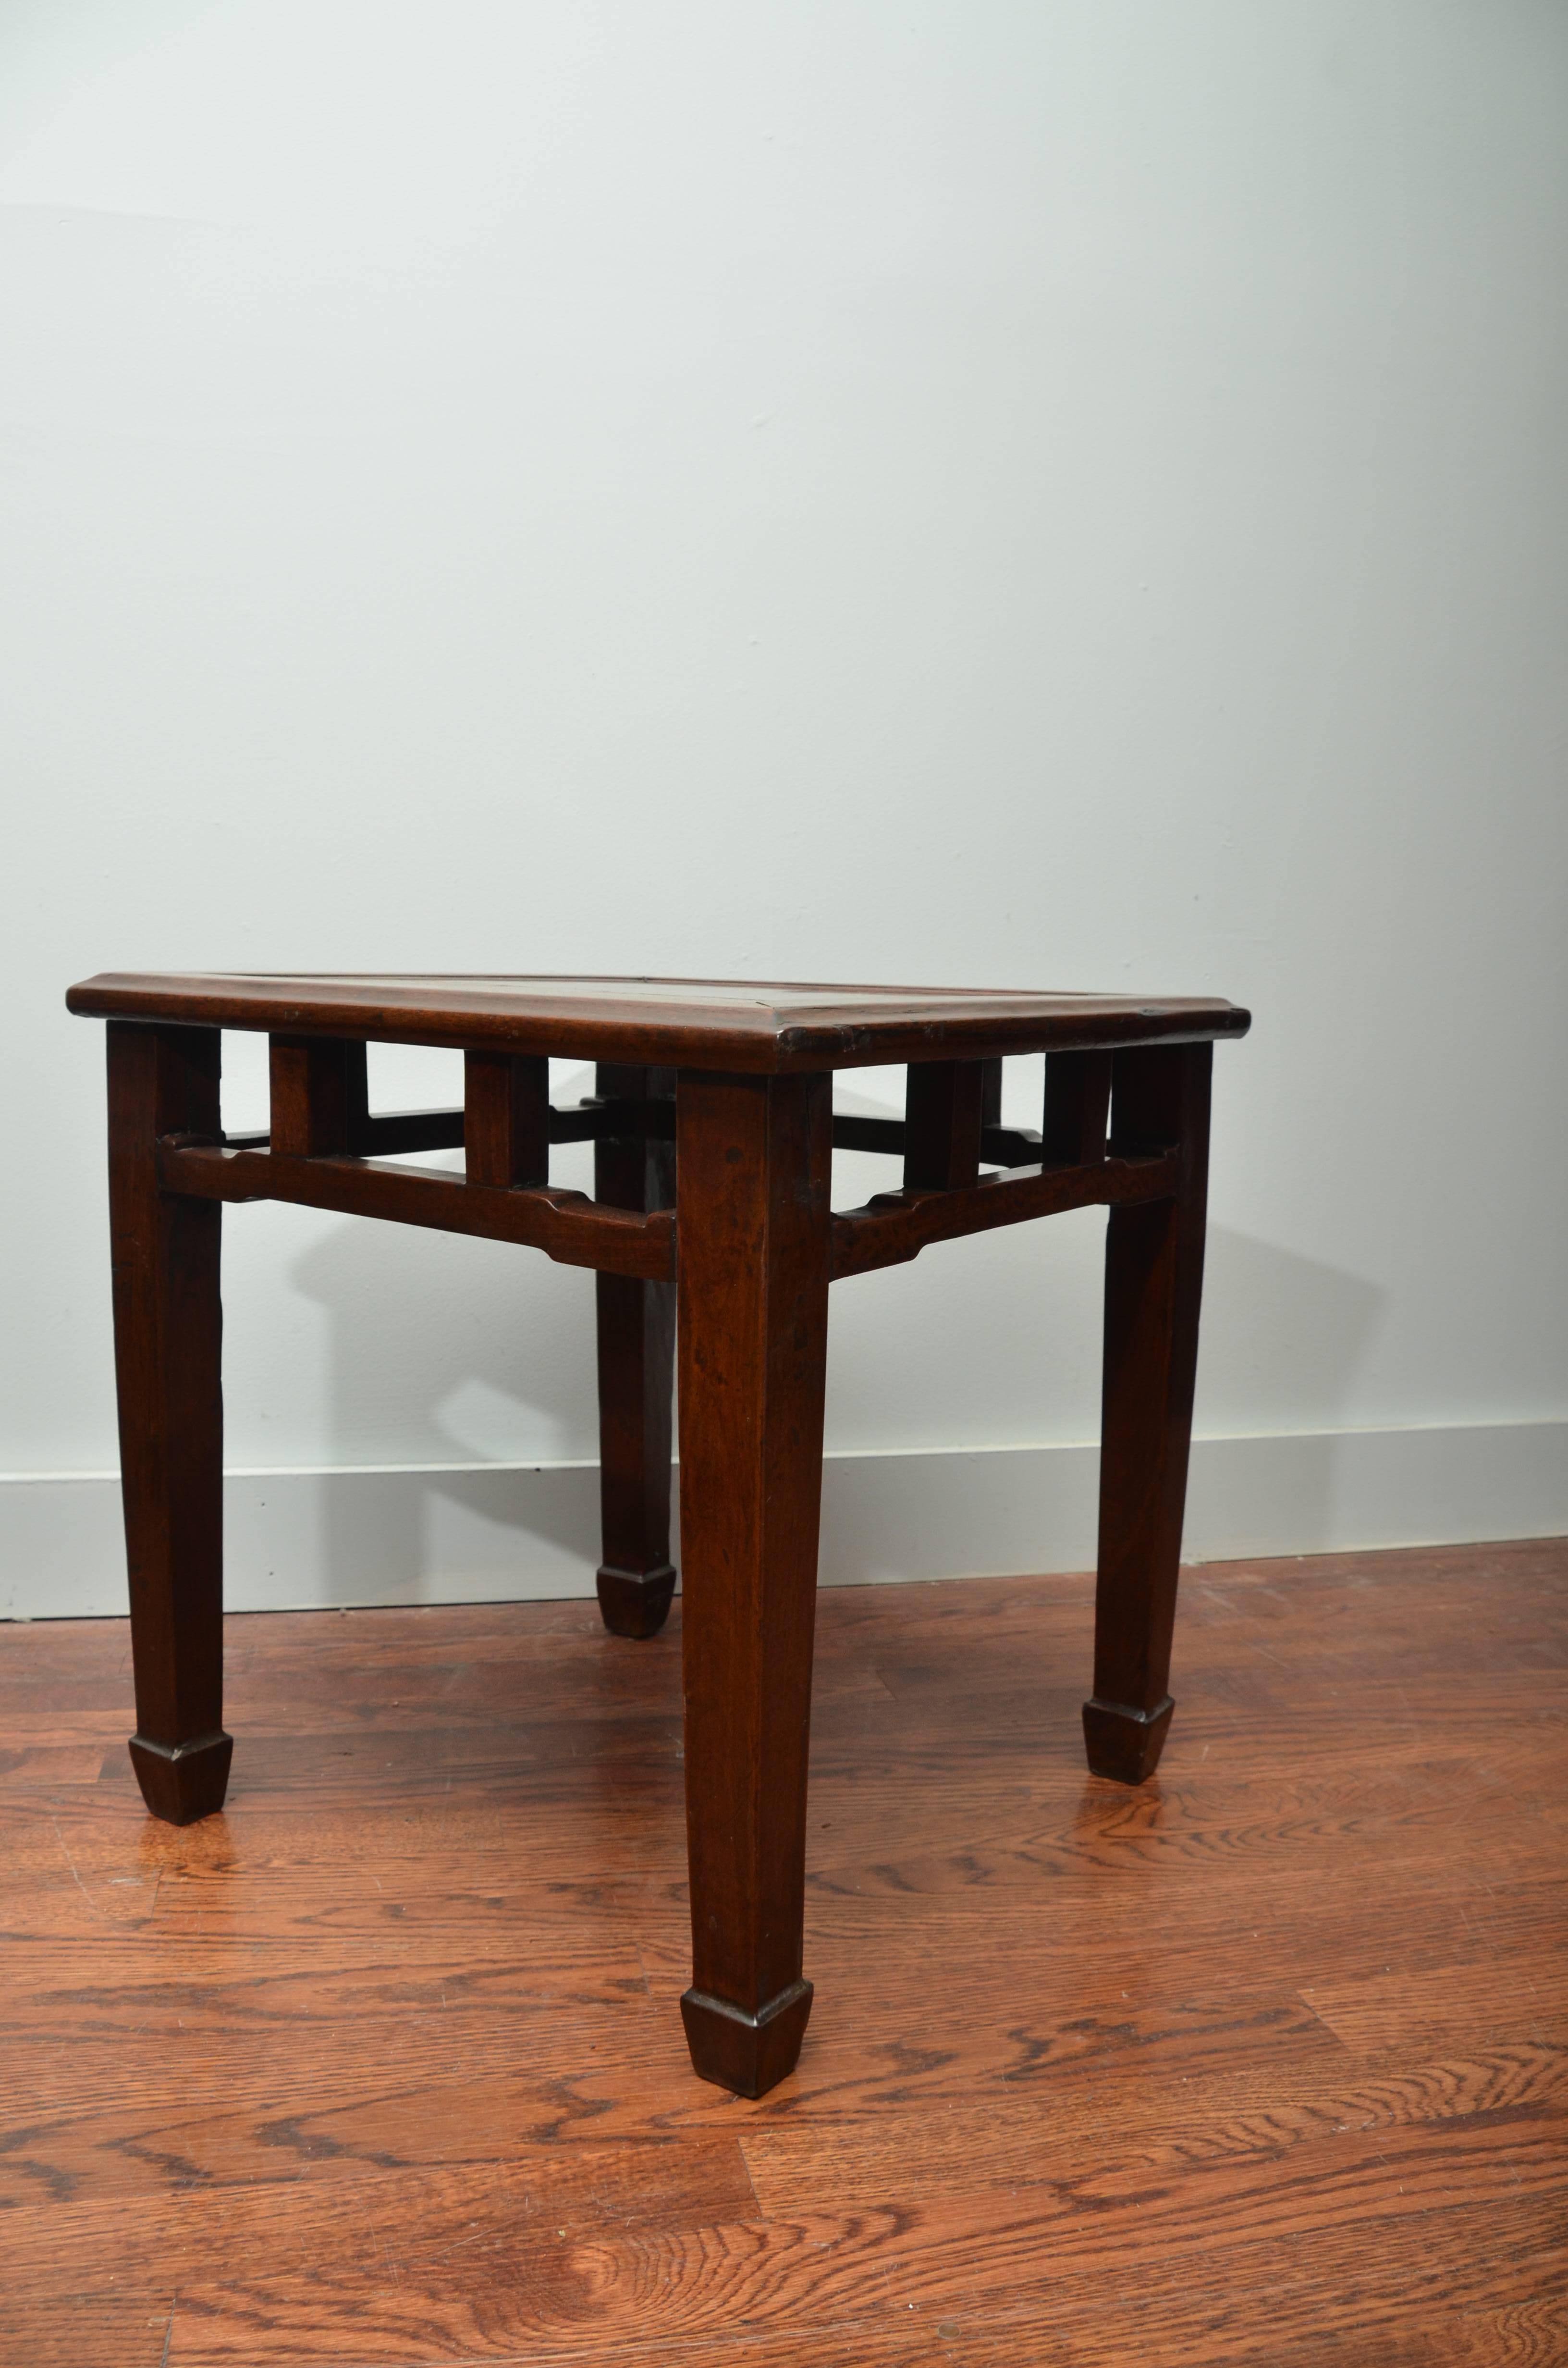 Late 19th century, Qing Dynasty Ming Inspired Jumu wood square stool/end table with beveled raised top.